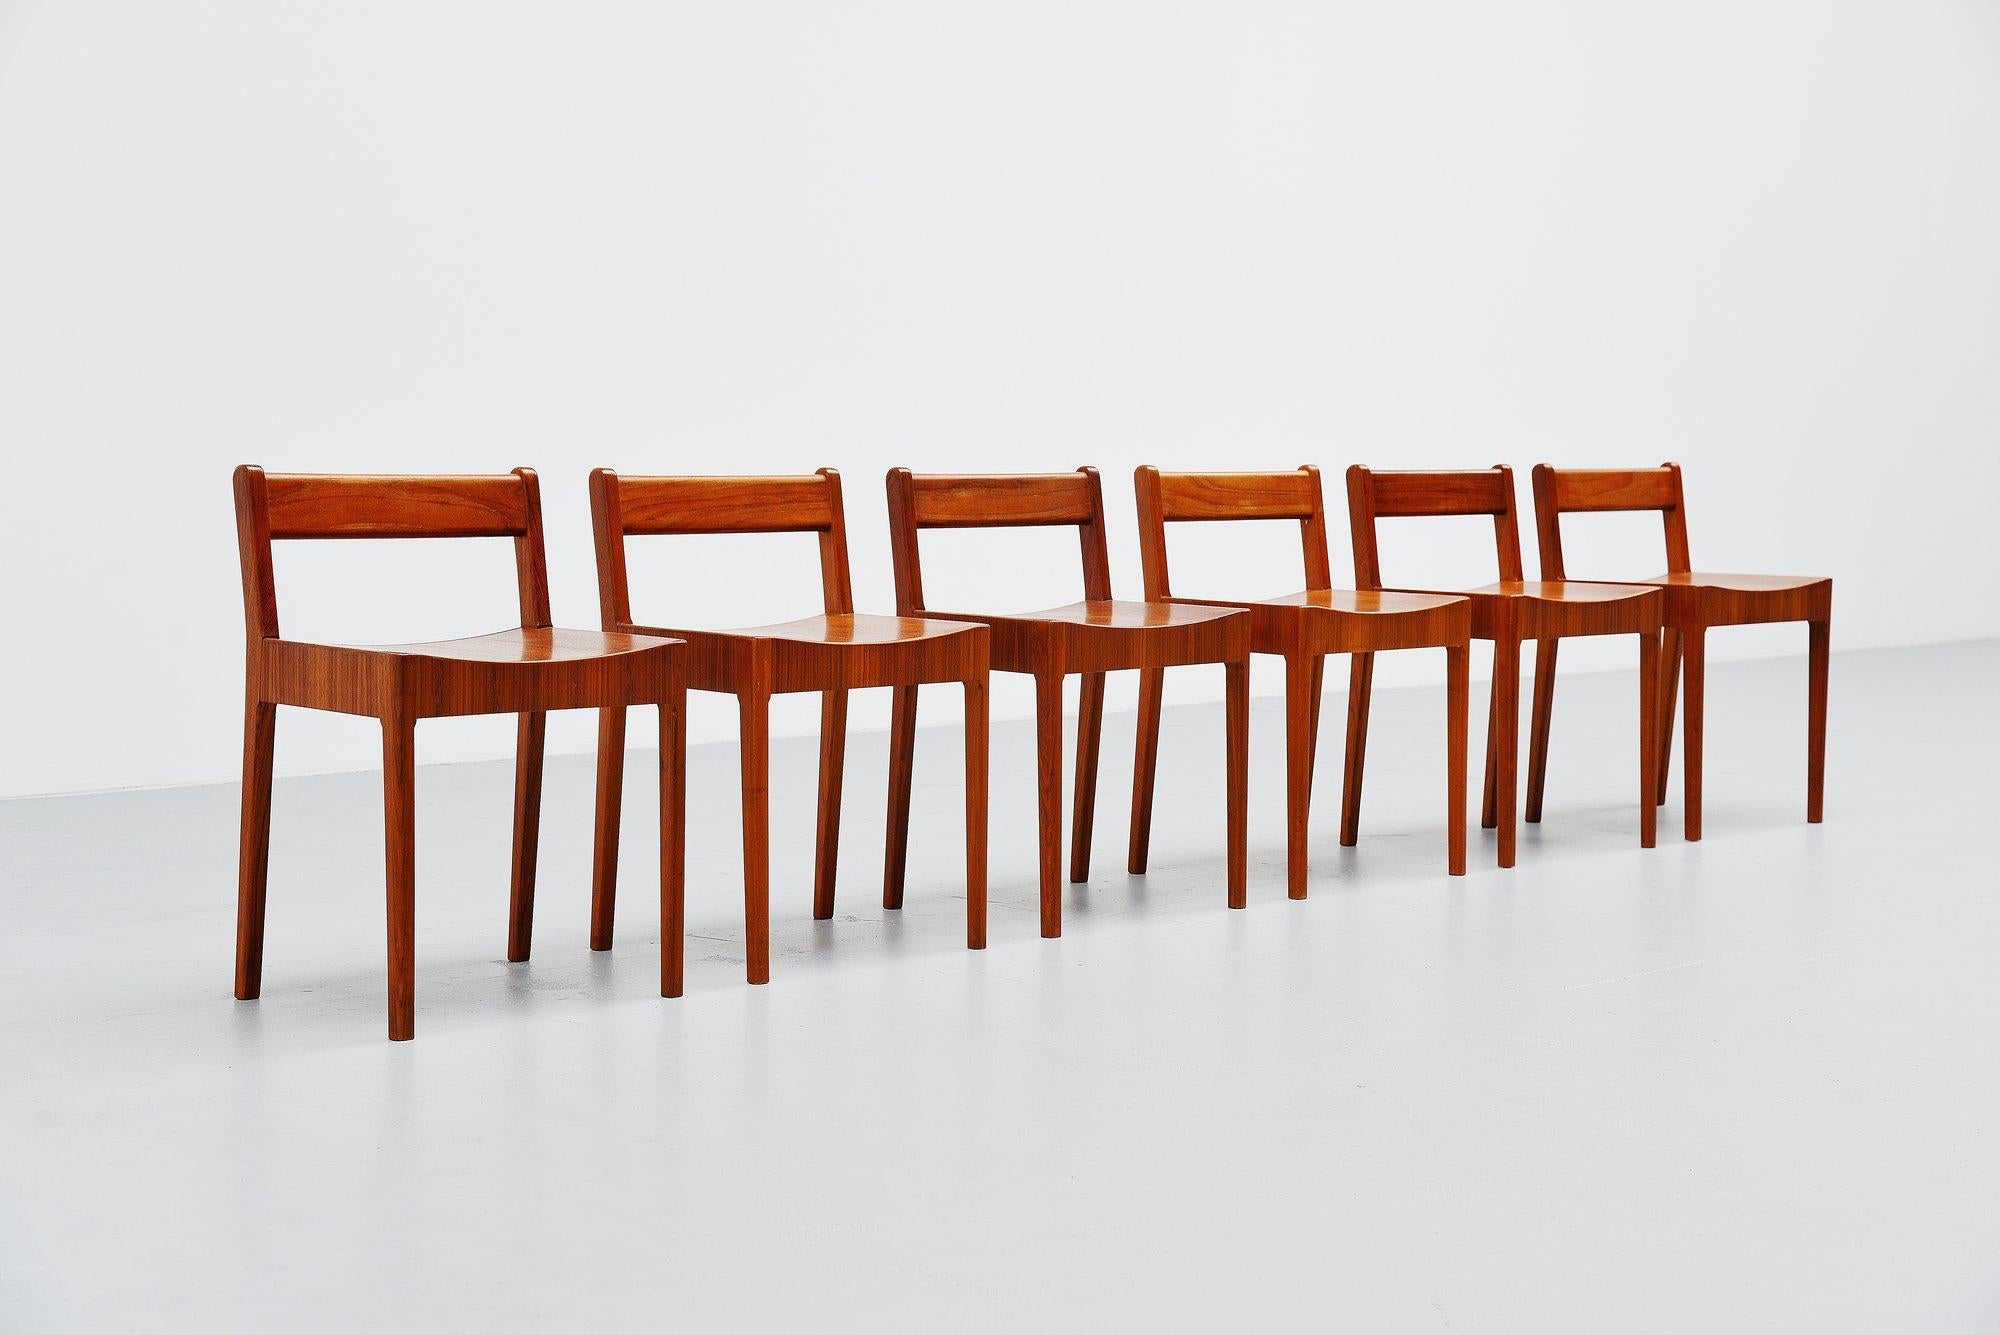 Very nice an unusual small set of breakfast chairs/stools manufactured by Plyfa, unknown designer Denmark 1960. These chairs are made of teak plywood and are fantastically made or finished. To me they are designed in the style of Jens Quistgaard, or